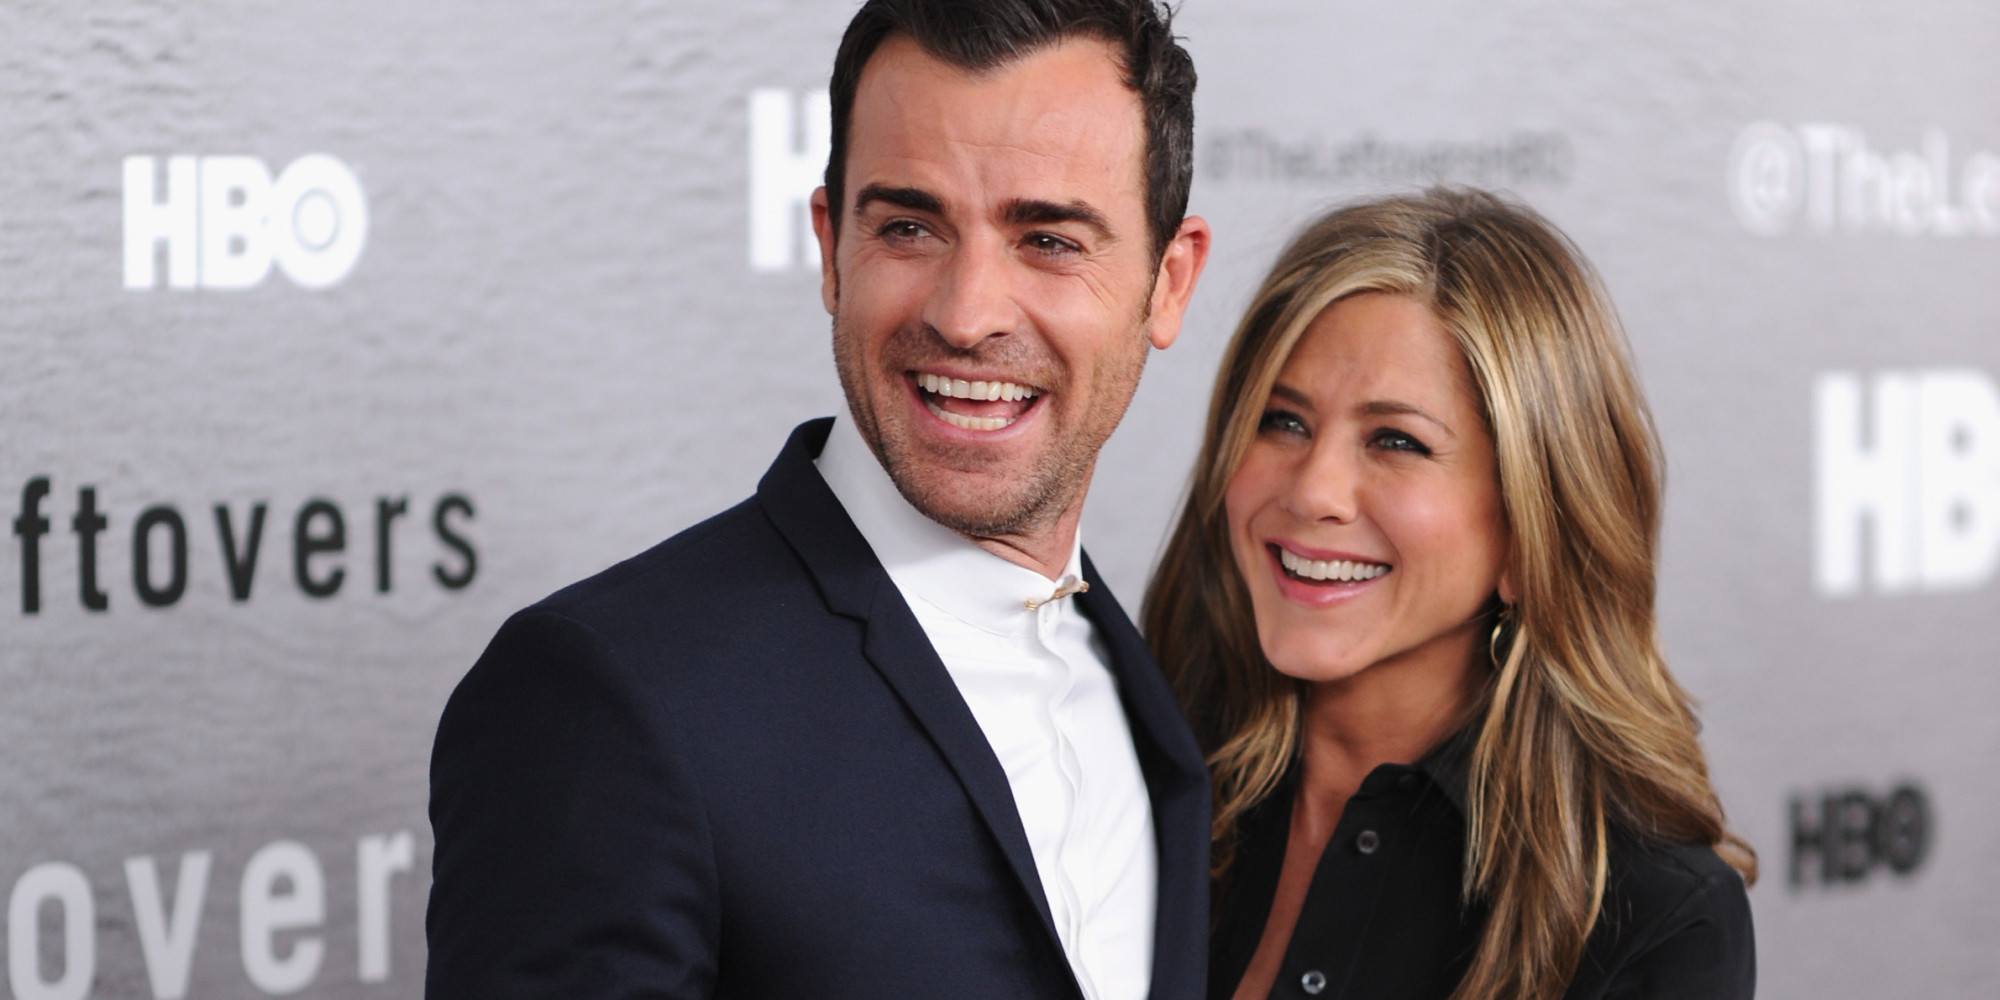 NEW YORK, NY - JUNE 23: Actors Justin Theroux and Jennifer Aniston attend "The Leftovers" premiere at NYU Skirball Center on June 23, 2014 in New York City. (Photo by Dimitrios Kambouris/Getty Images)